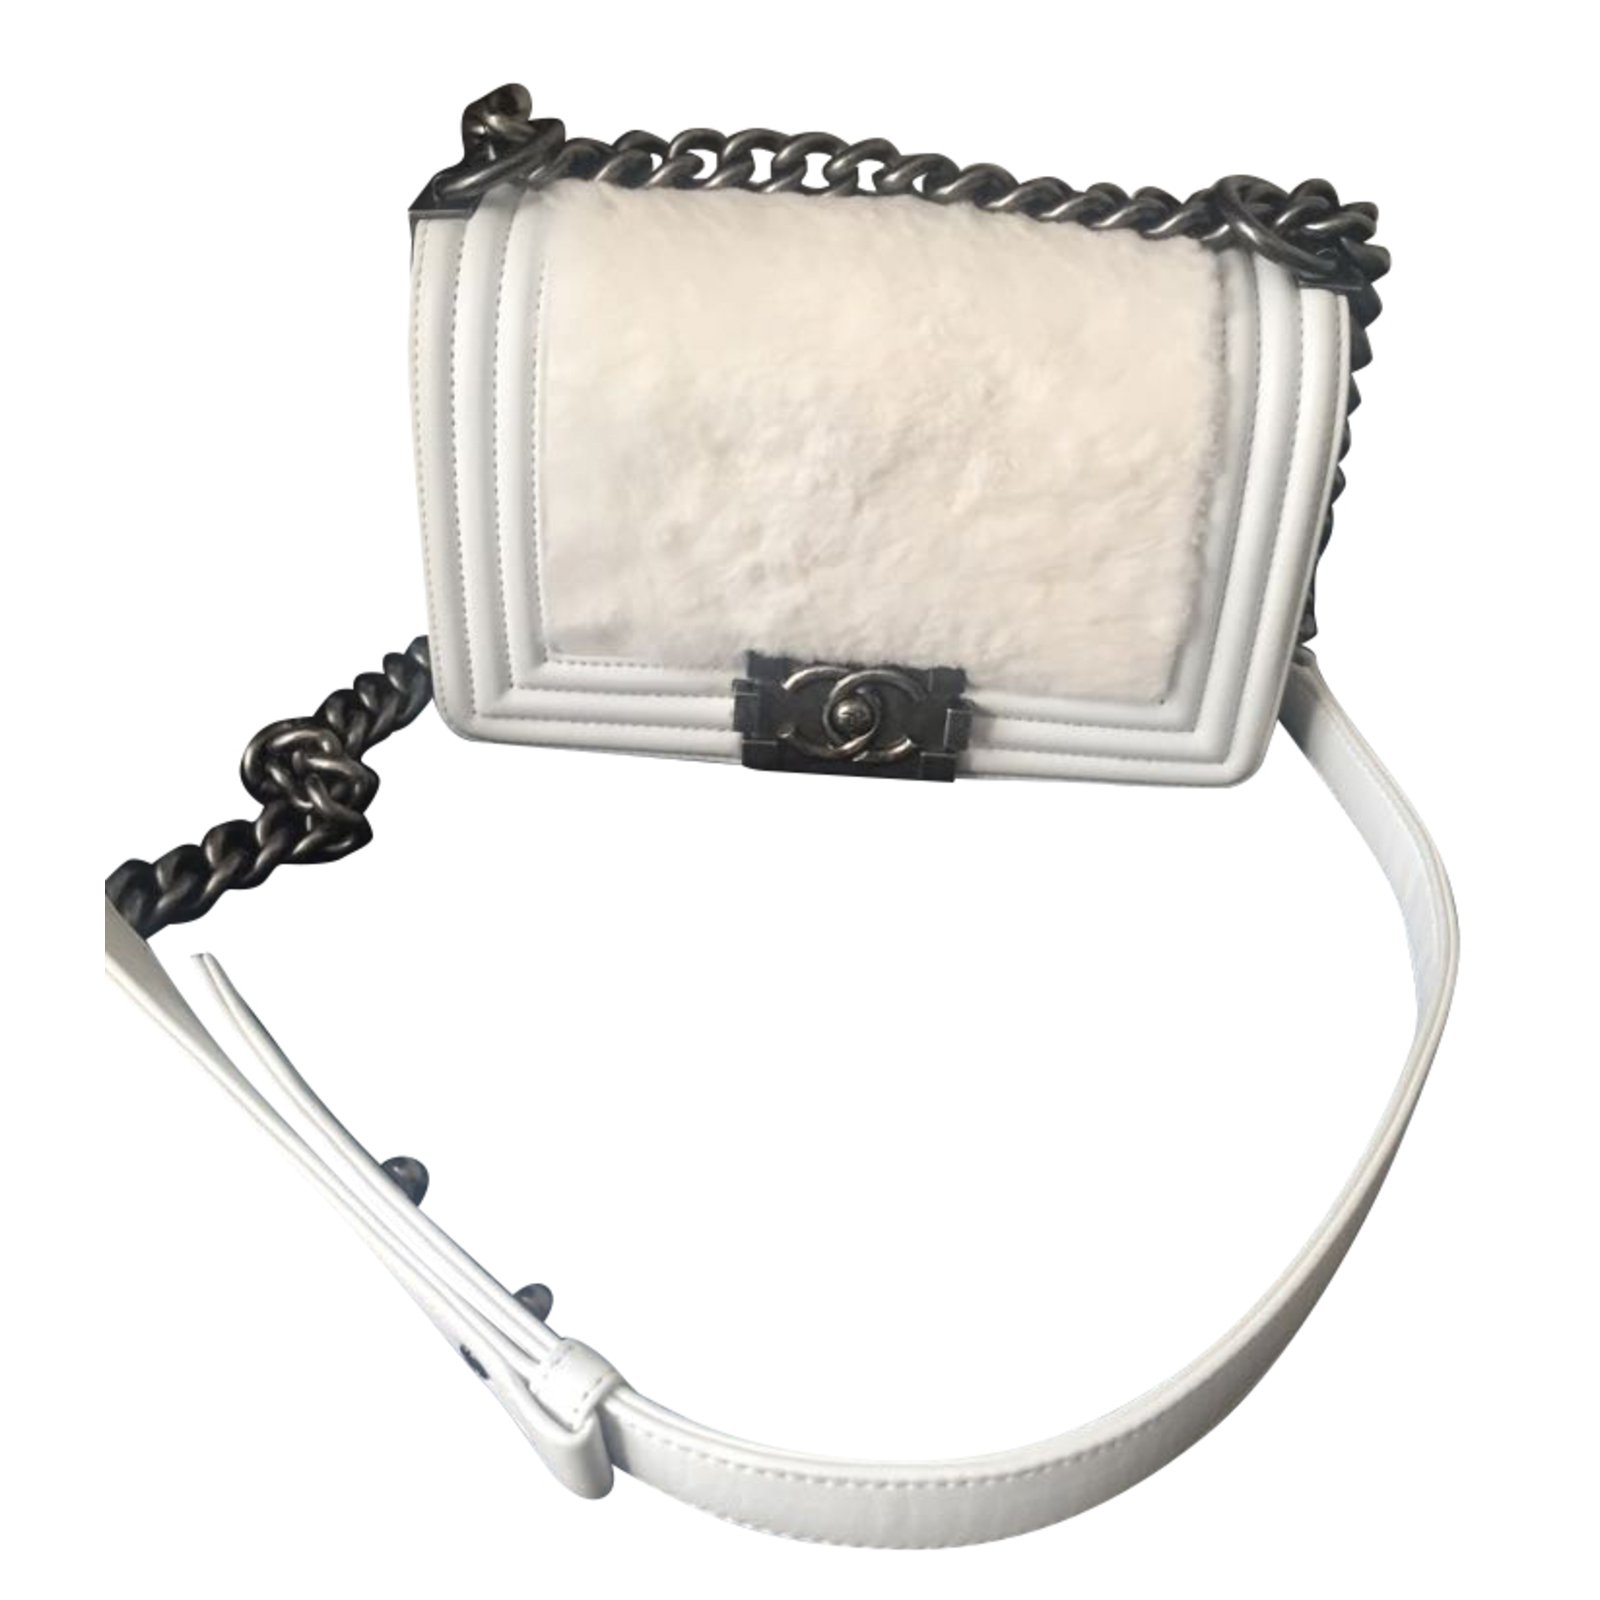 Chanel - Small Boy Bag - White Caviar Leather - CGHW - New